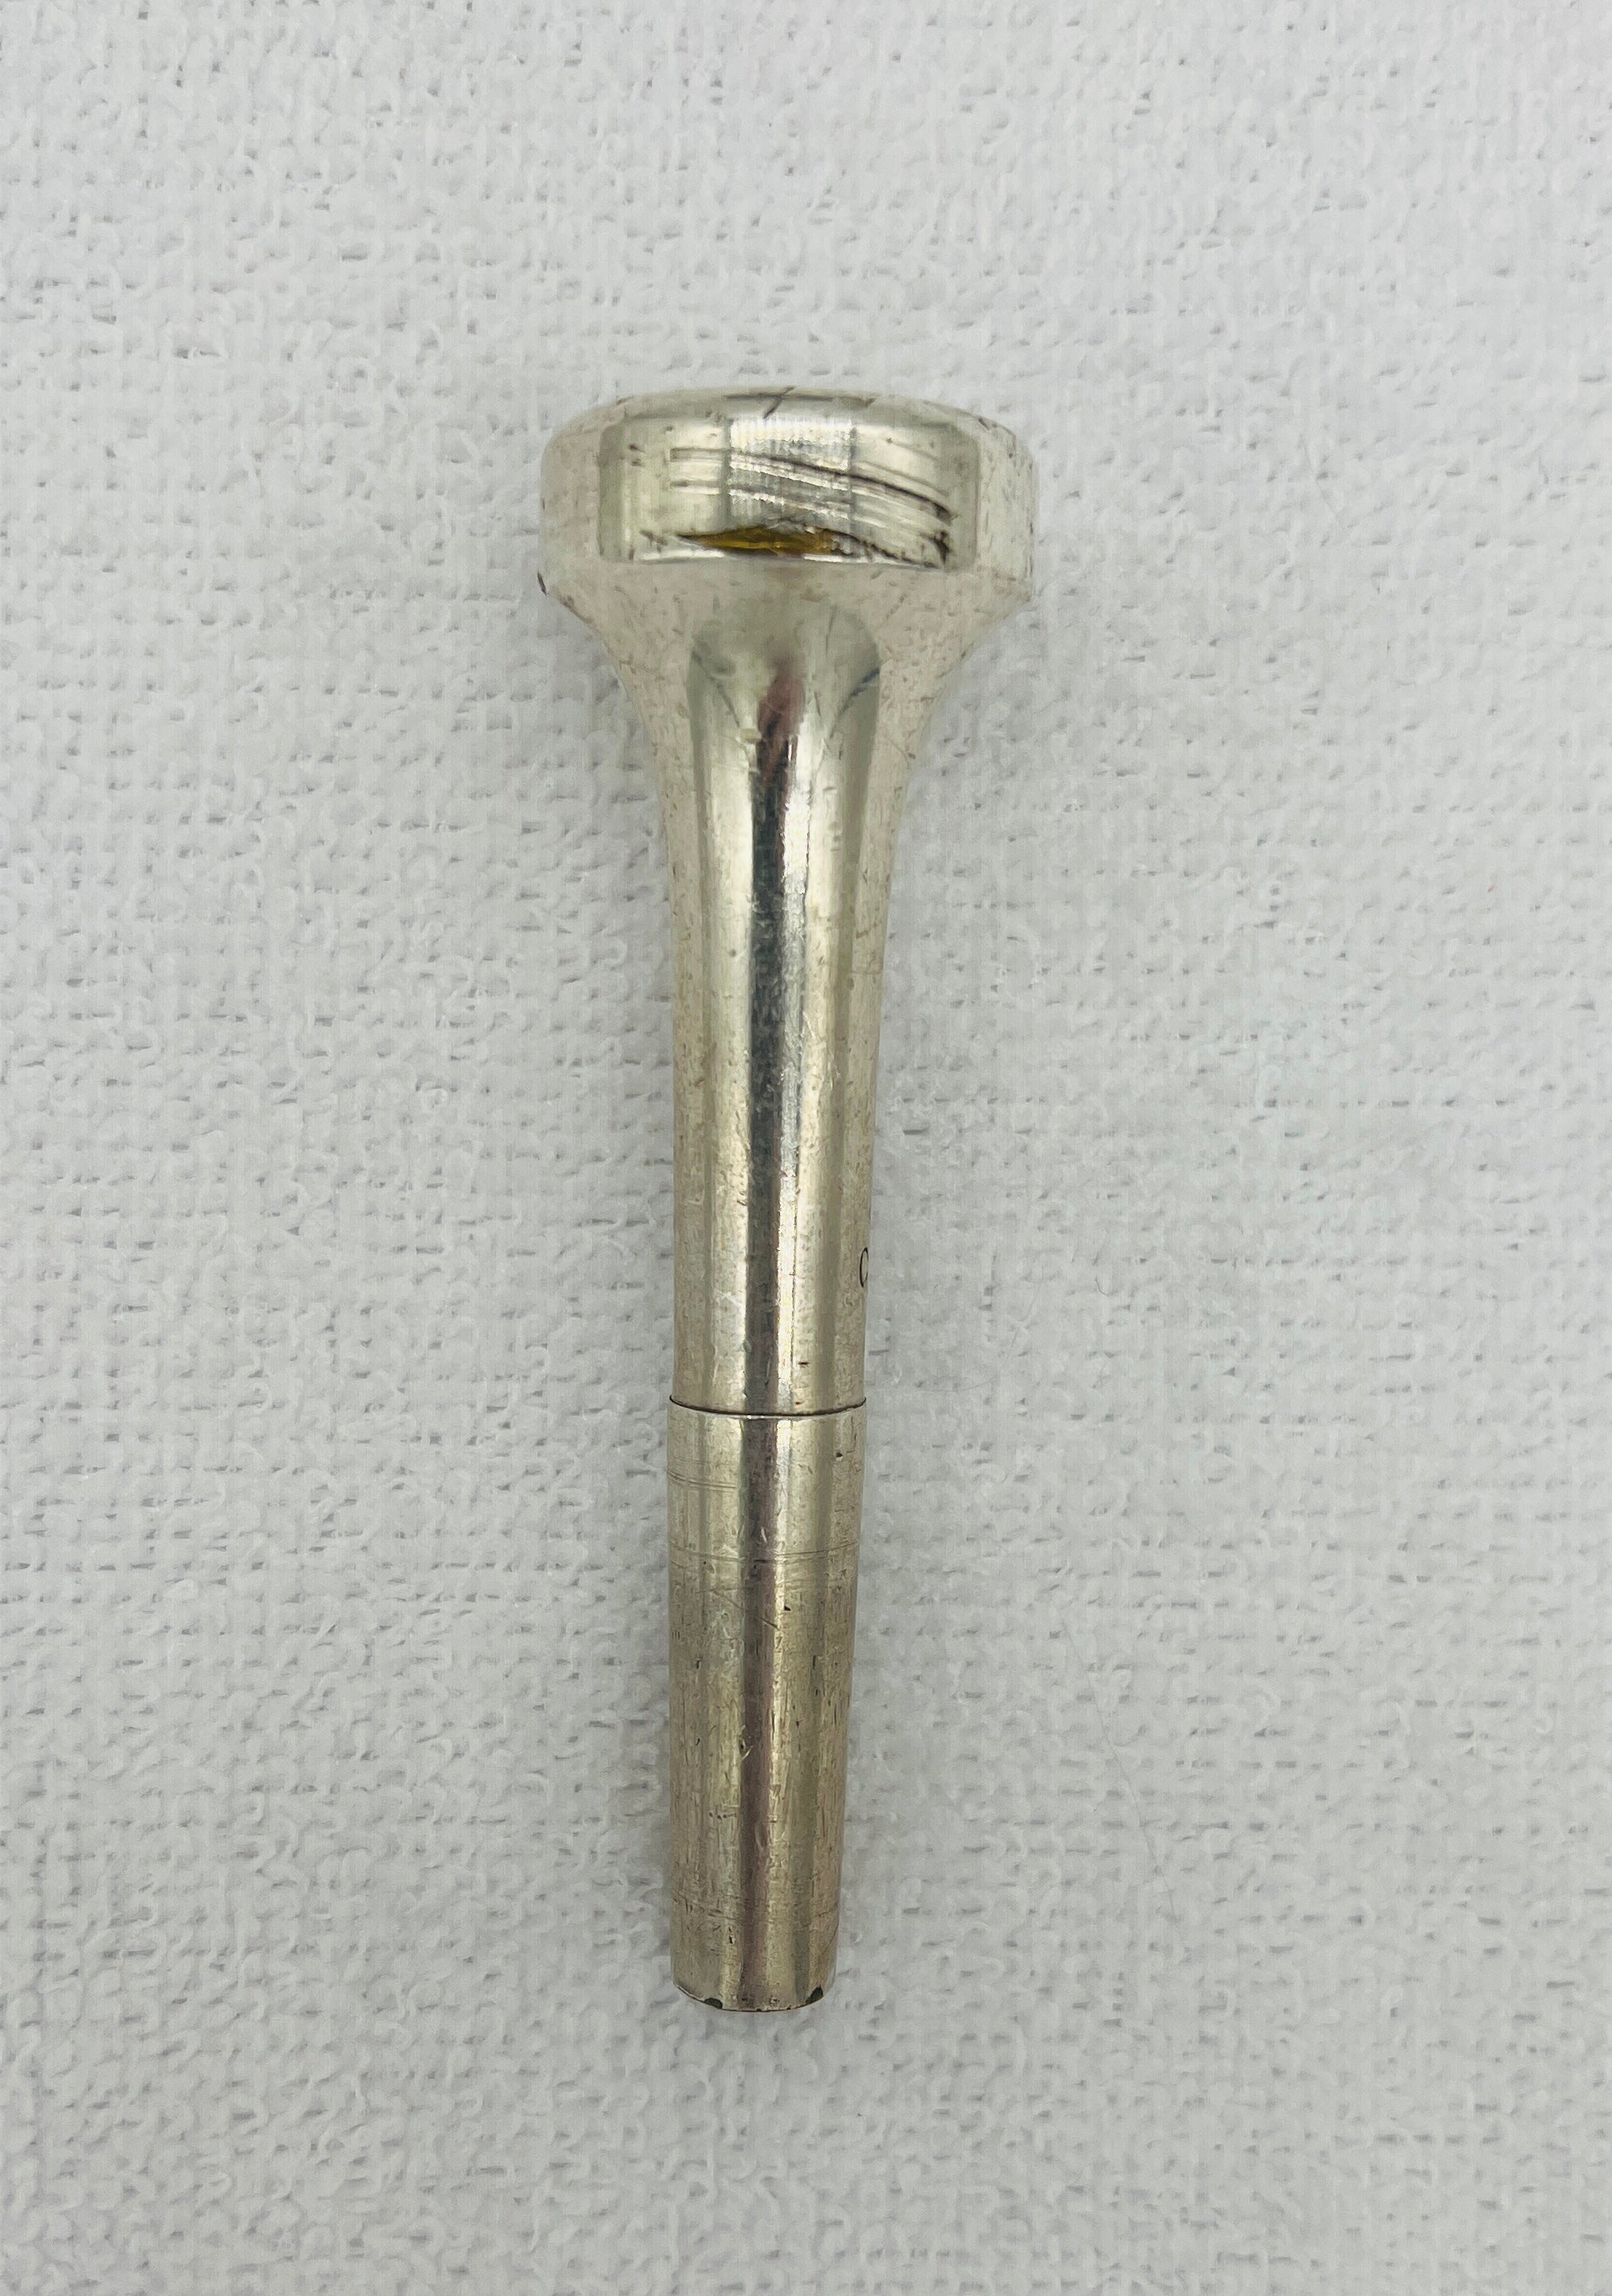 CONN 4 Trumpet Mouthpiece Silver Plated USED